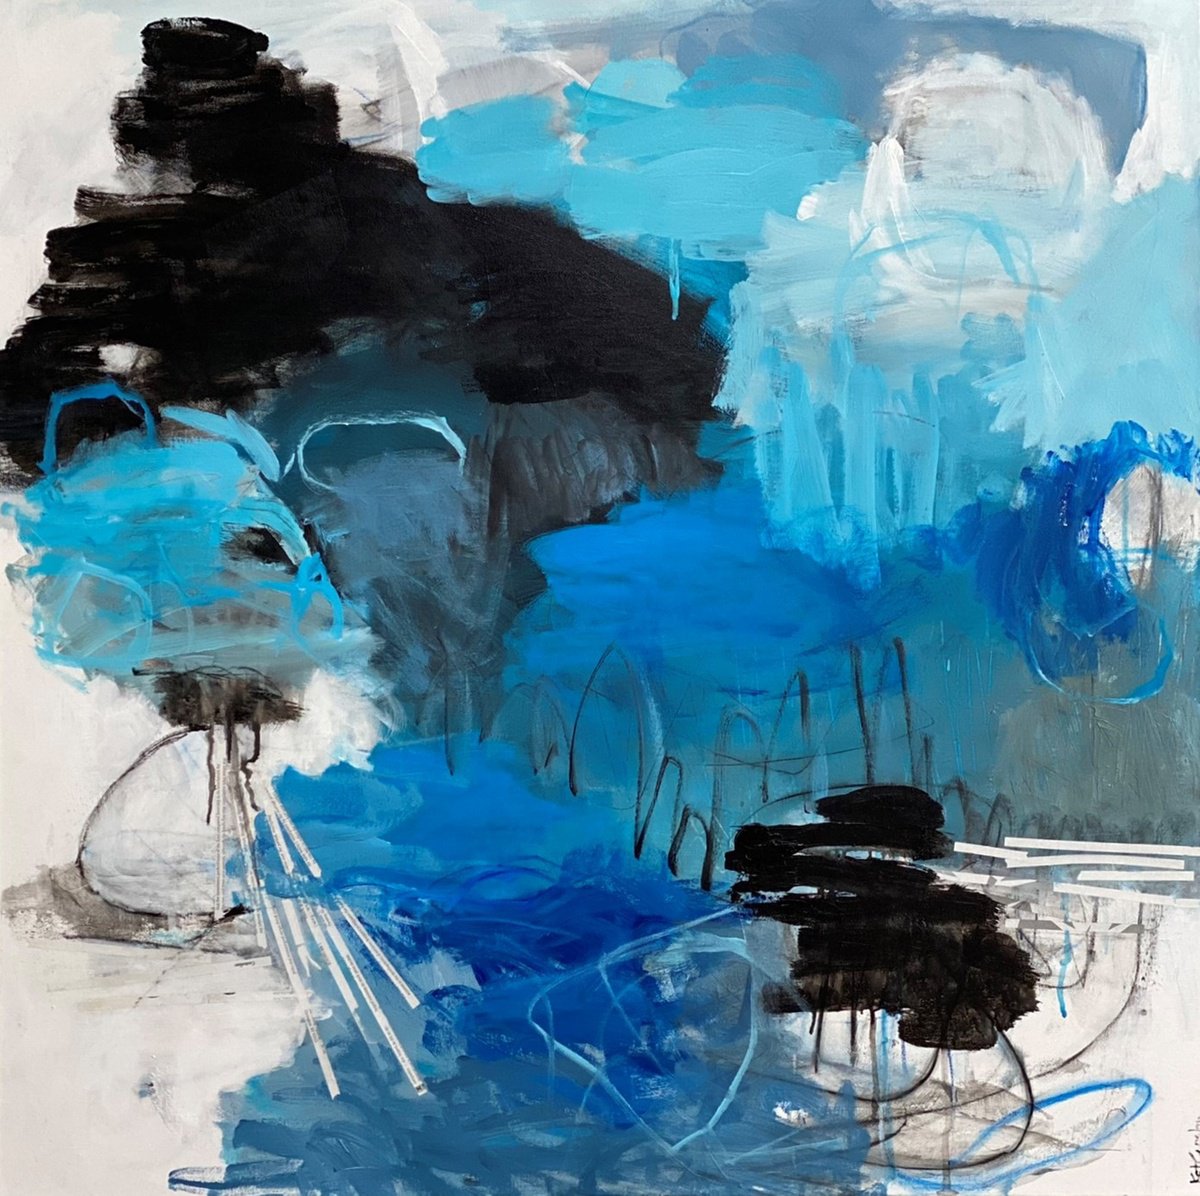 Blue on Black - playful bold whimsical abstract blue, black and white painting by Kat Crosby